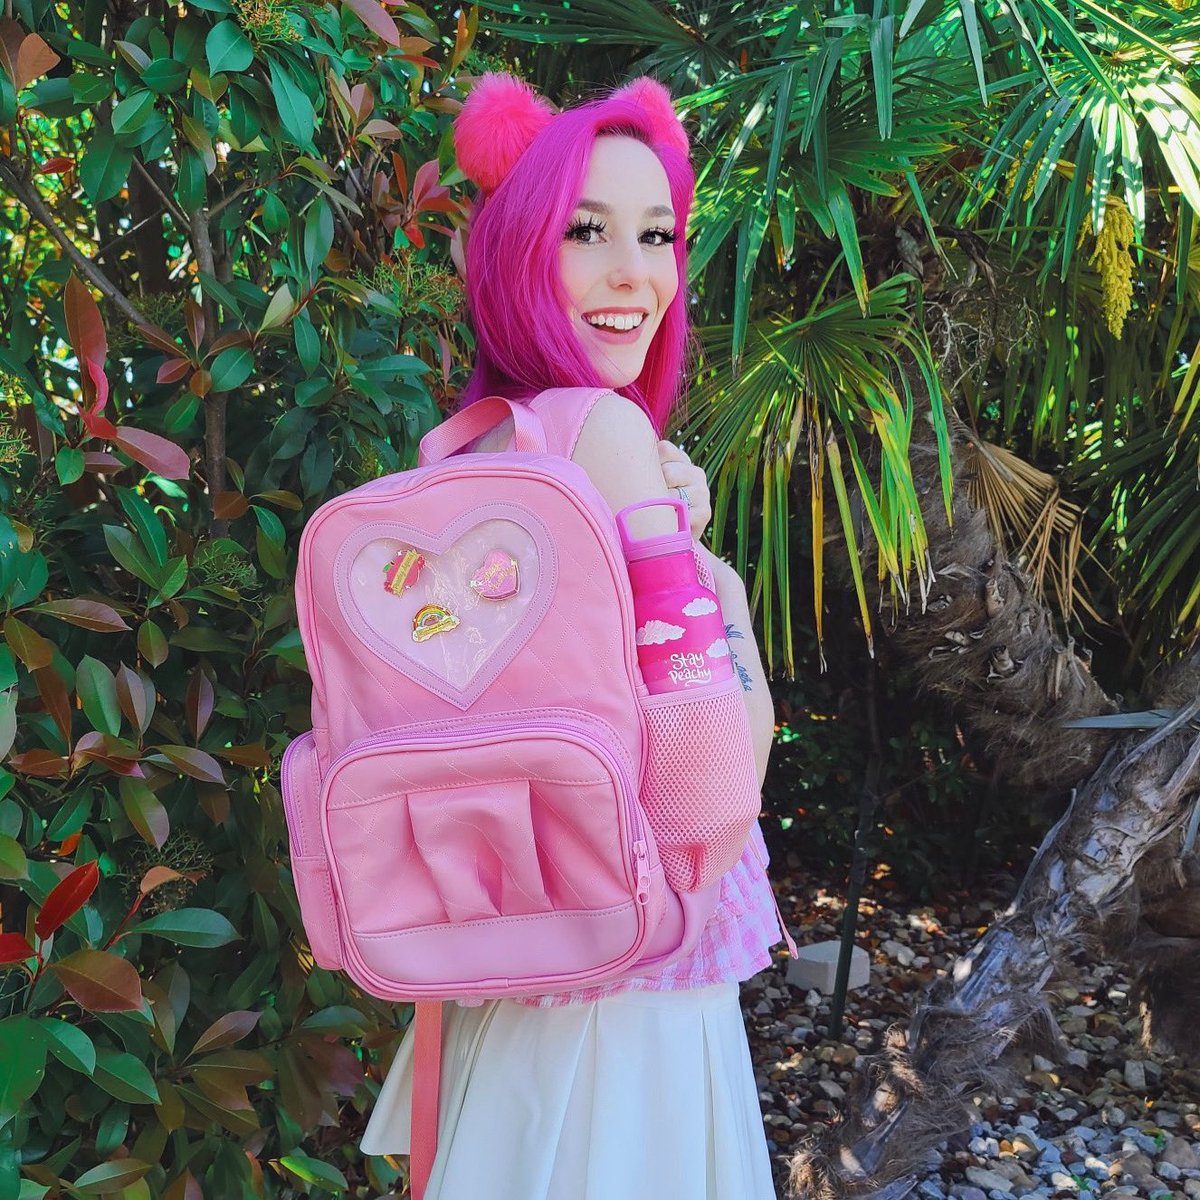 Meganplays On Twitter The Backpack Process All The Way Back To My Original Photoshopped Concept It Took A Few Runs But I Think We Definitely Got It Right Https T Co Jyb9huzpxl